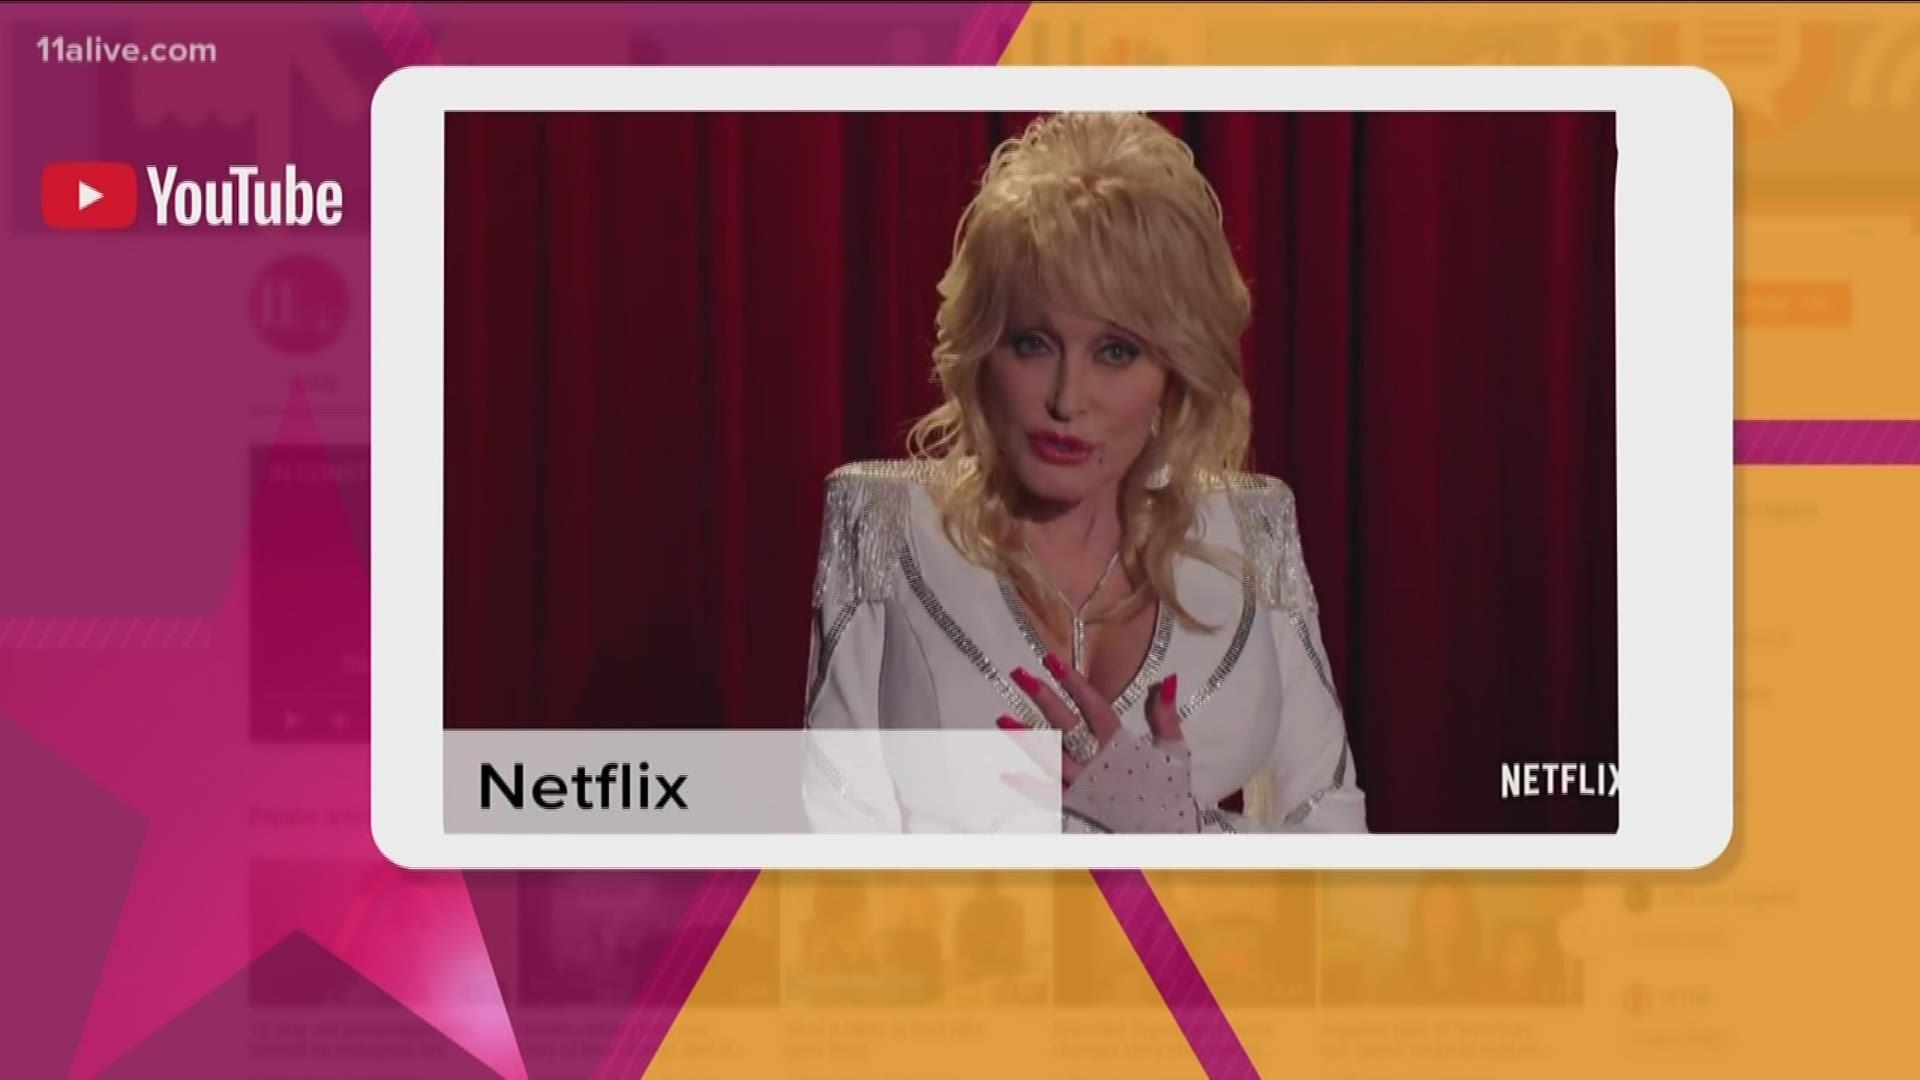 The episodic series features different stories based on Dolly Parton songs, and premieres on Netflix on Nov. 22.